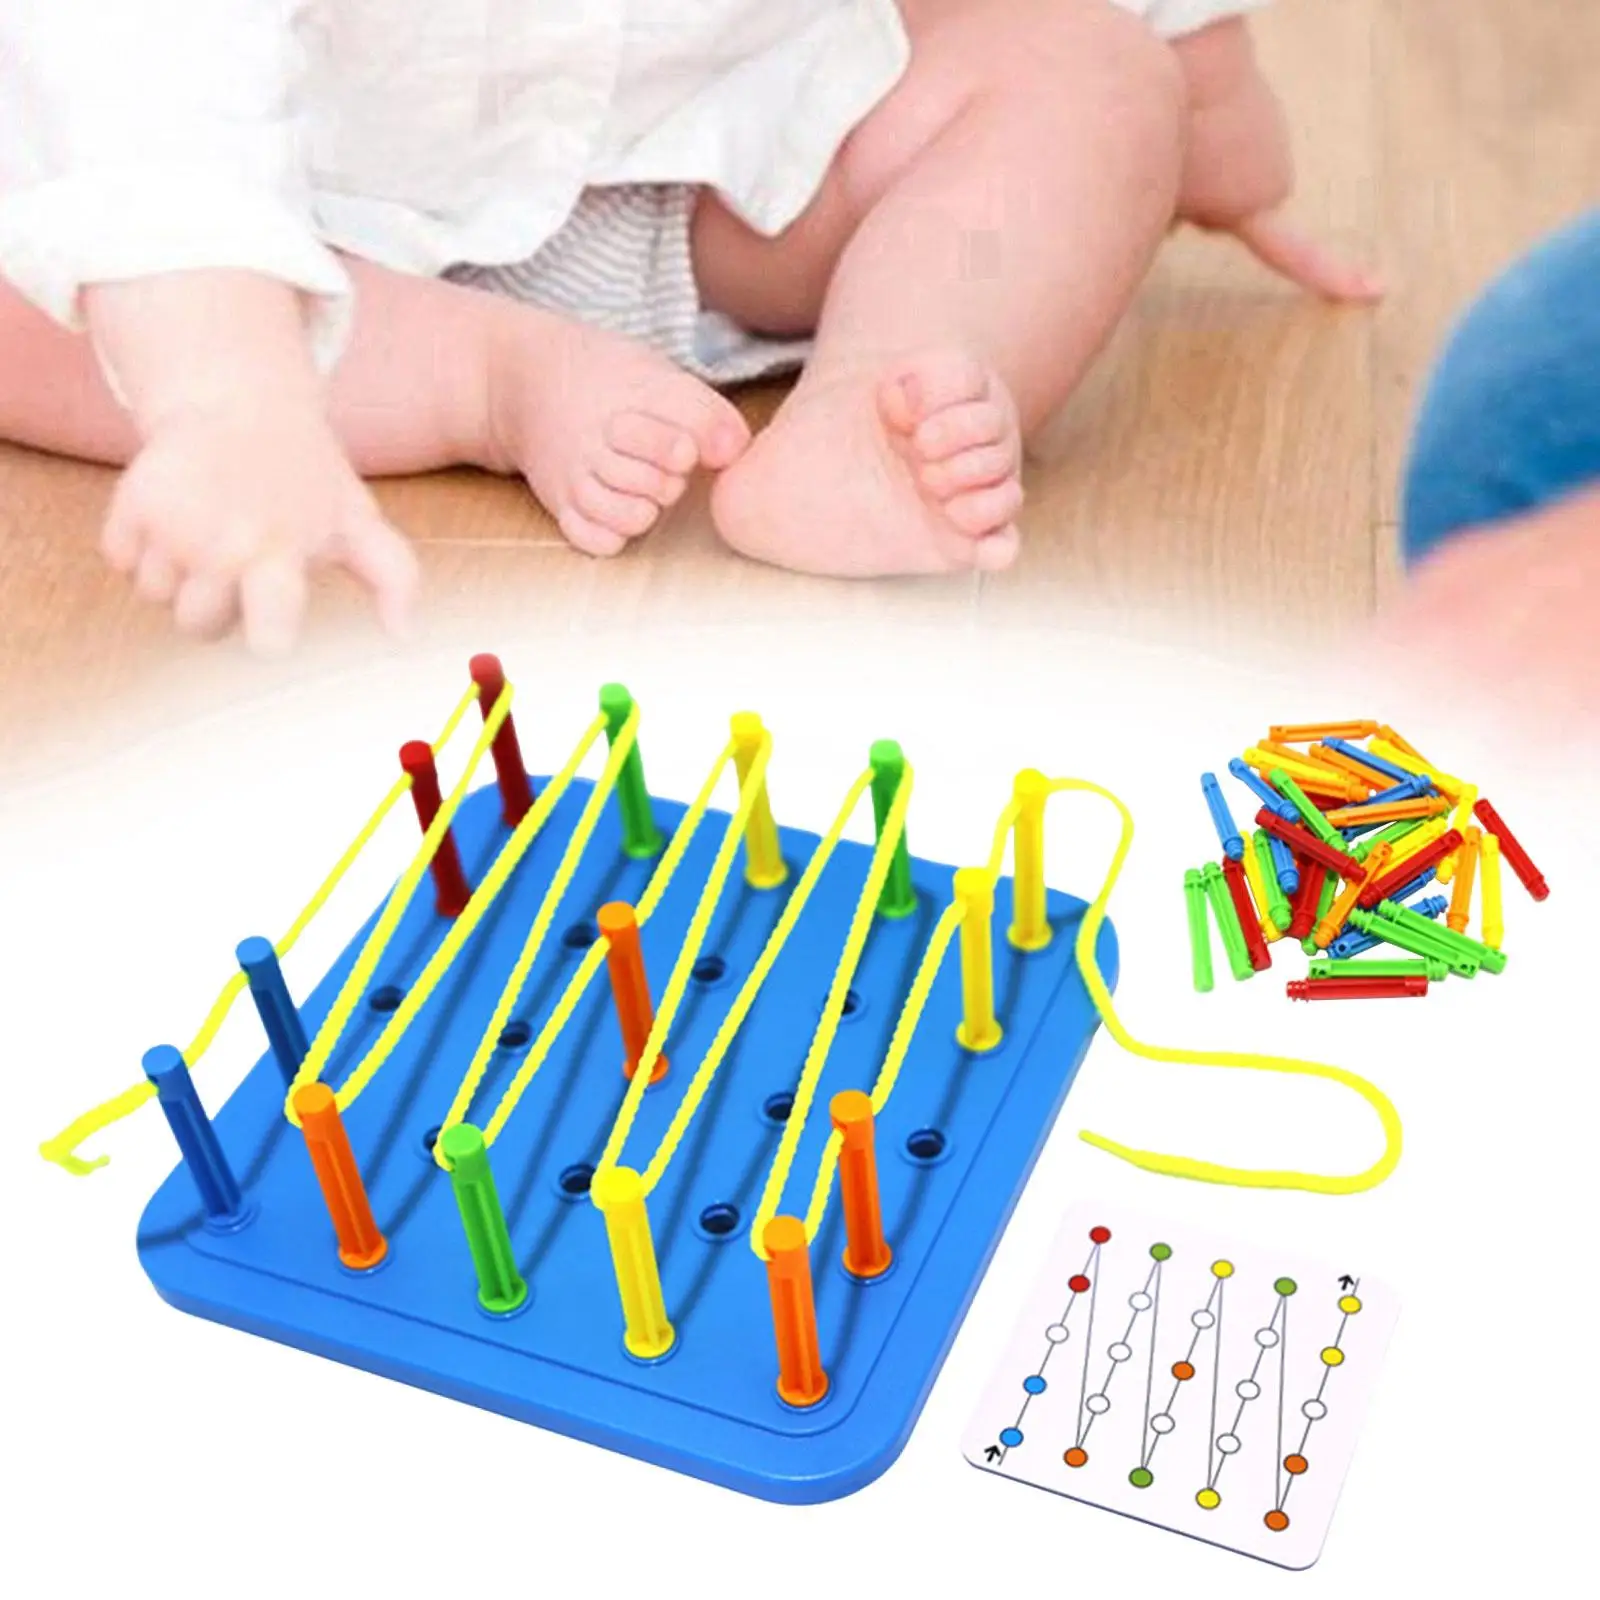 

Kids Threading Toy Creative Learning Pattern Threading Rope Game for Children Birthday Gift Kids Boy and Girls Age 3 4 5 Years